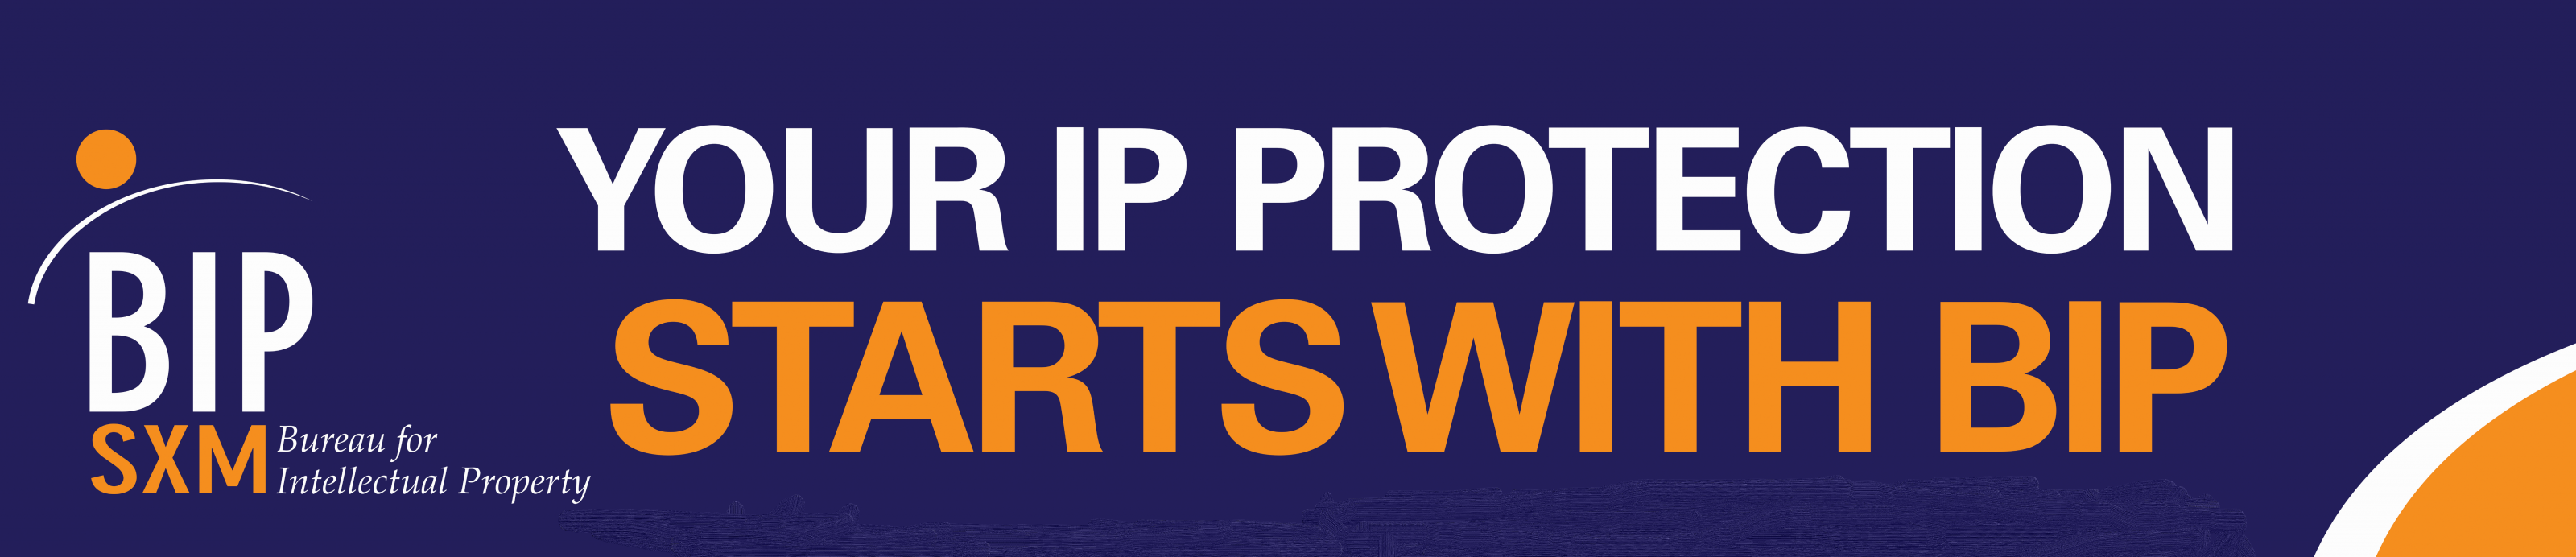 Your IP protection starts with BIP